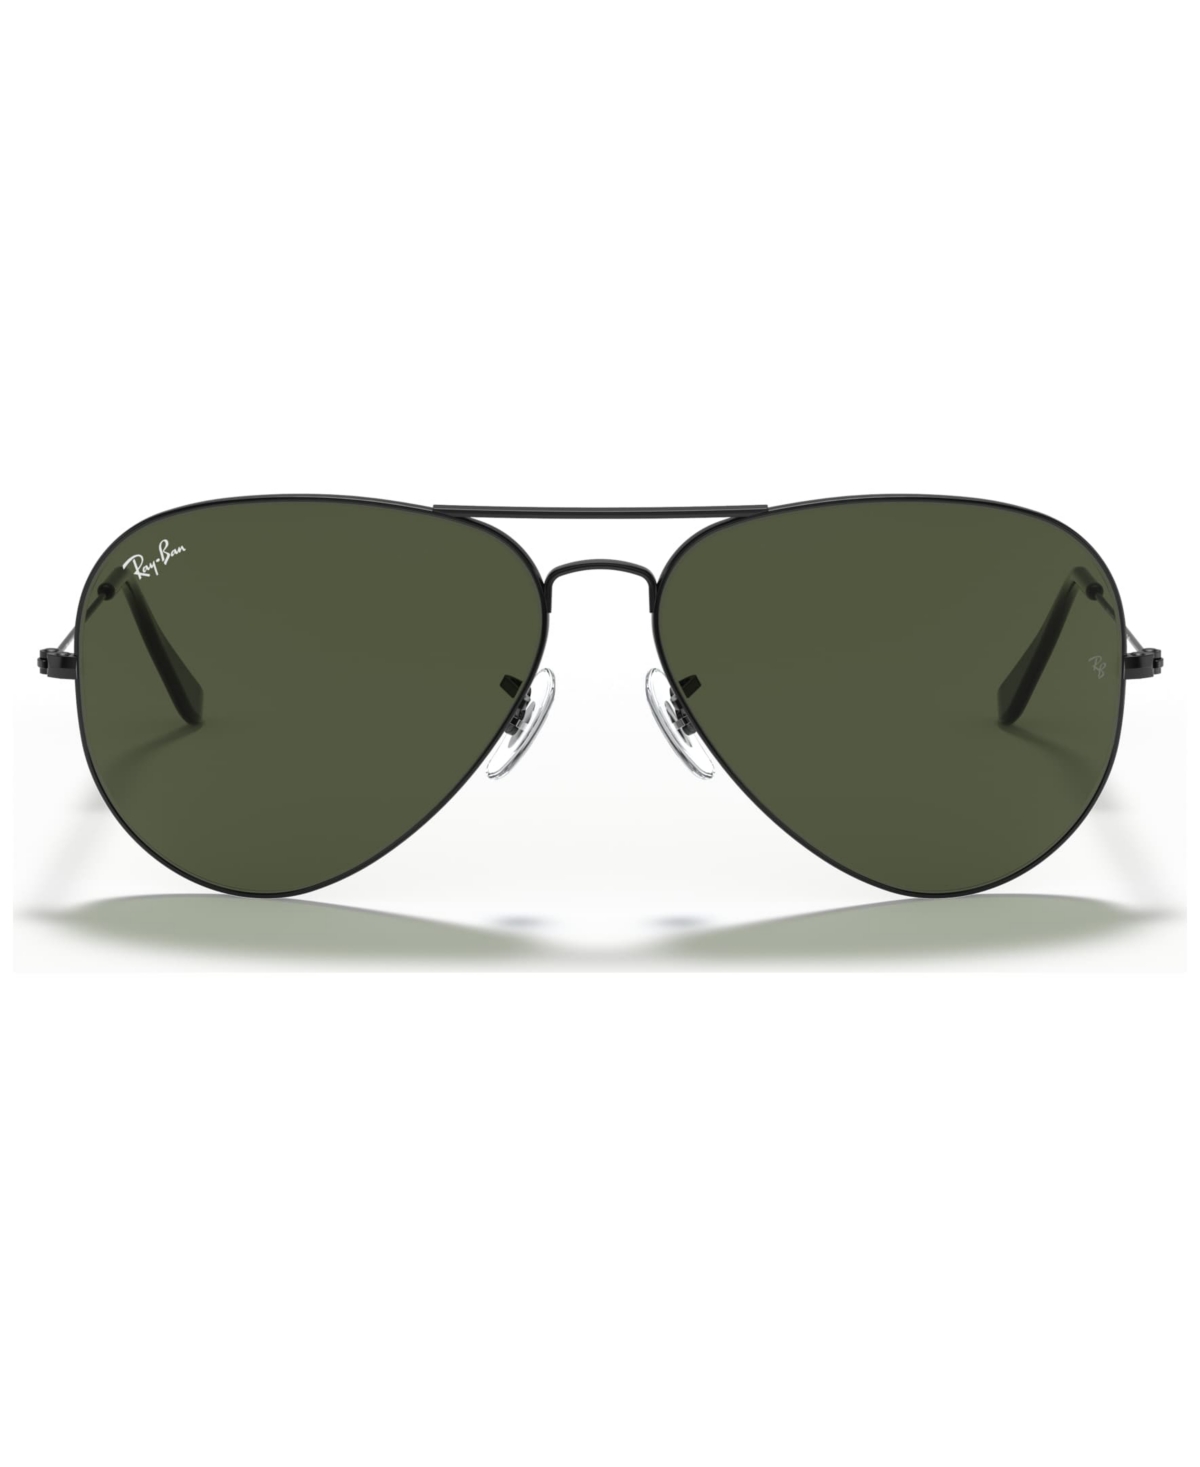 Ray Ban Sunglasses, Rb3026 Aviator Large In Gold,green